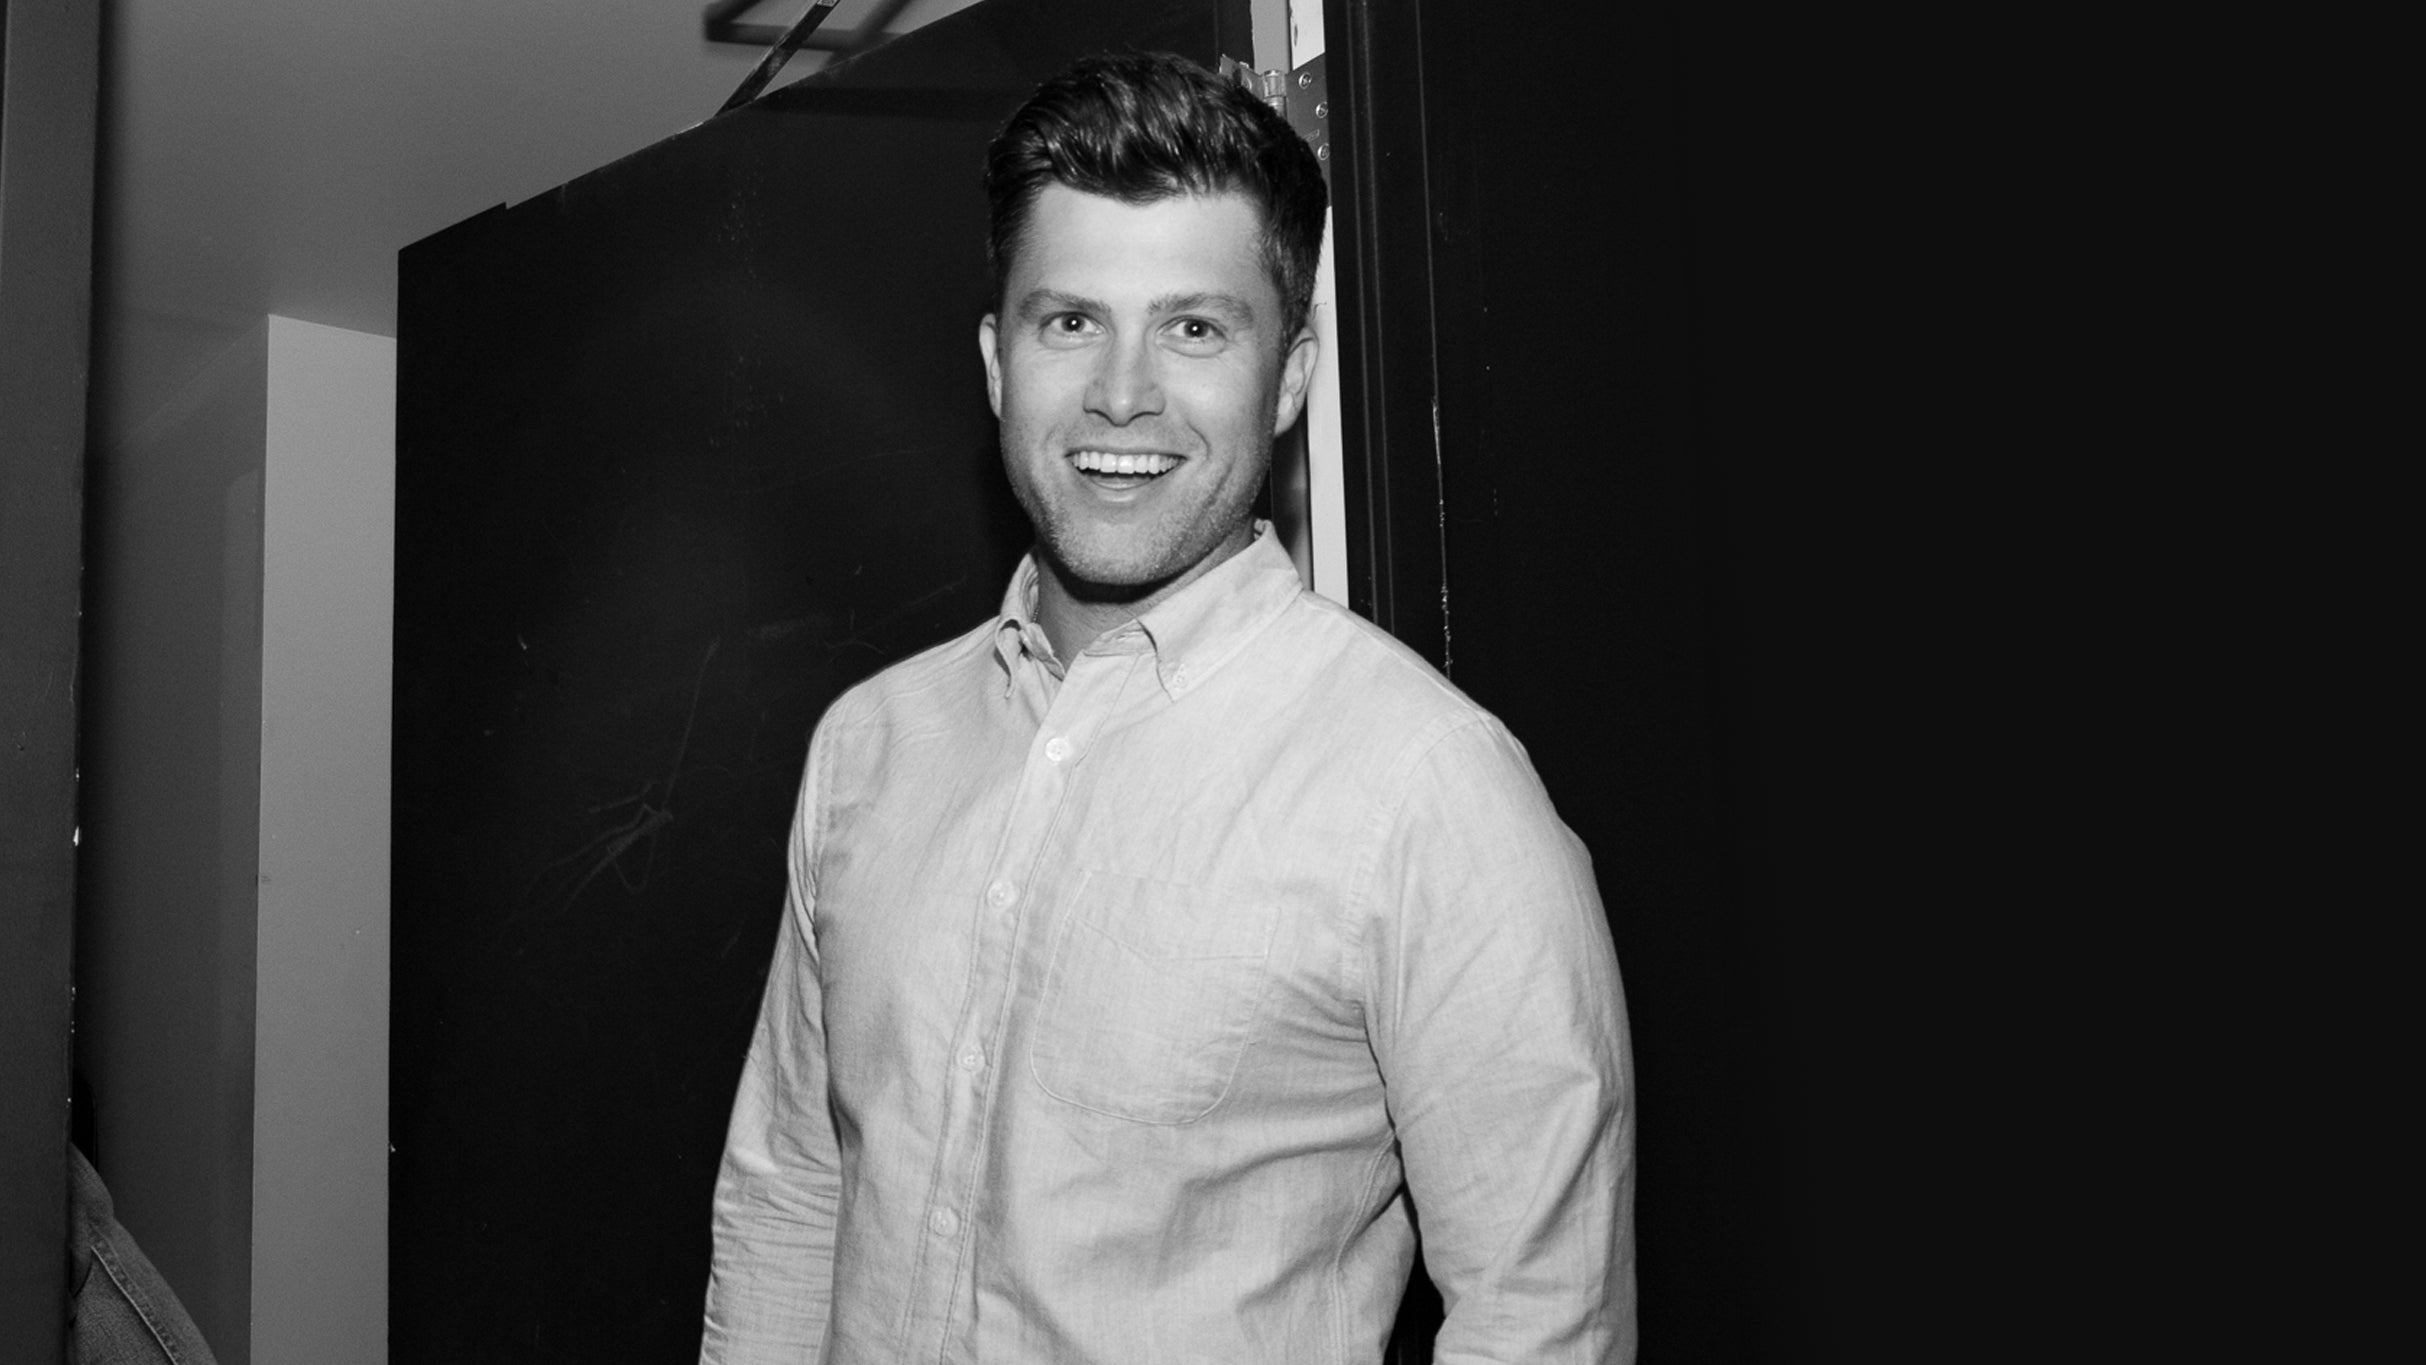 Colin Jost free pre-sale password for early tickets in Vancouver